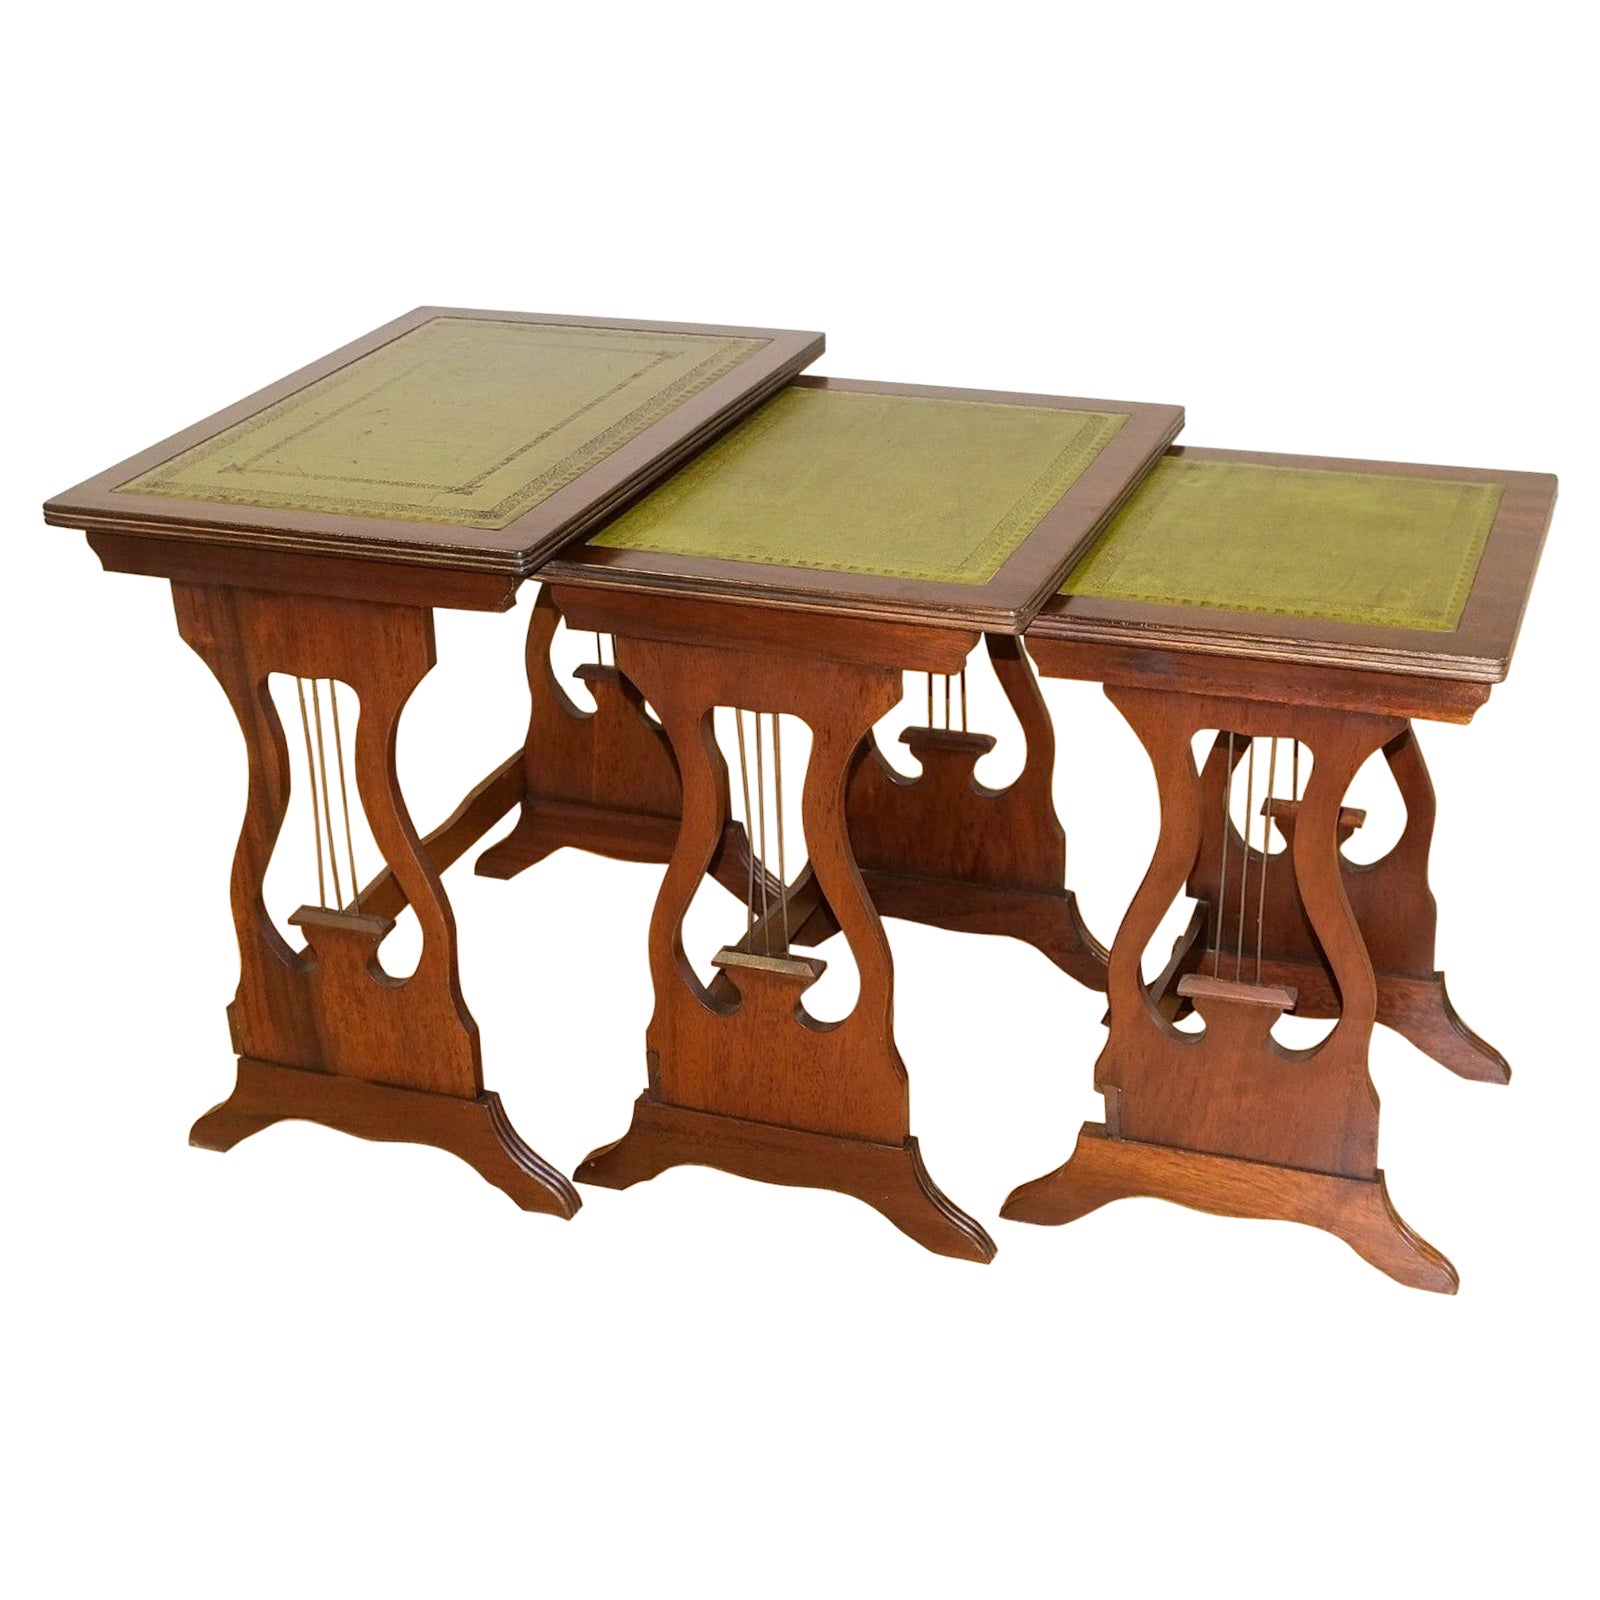 Lovely Hardwood Nest of Tables Green Leather Top with Harp Shape Support Sides For Sale